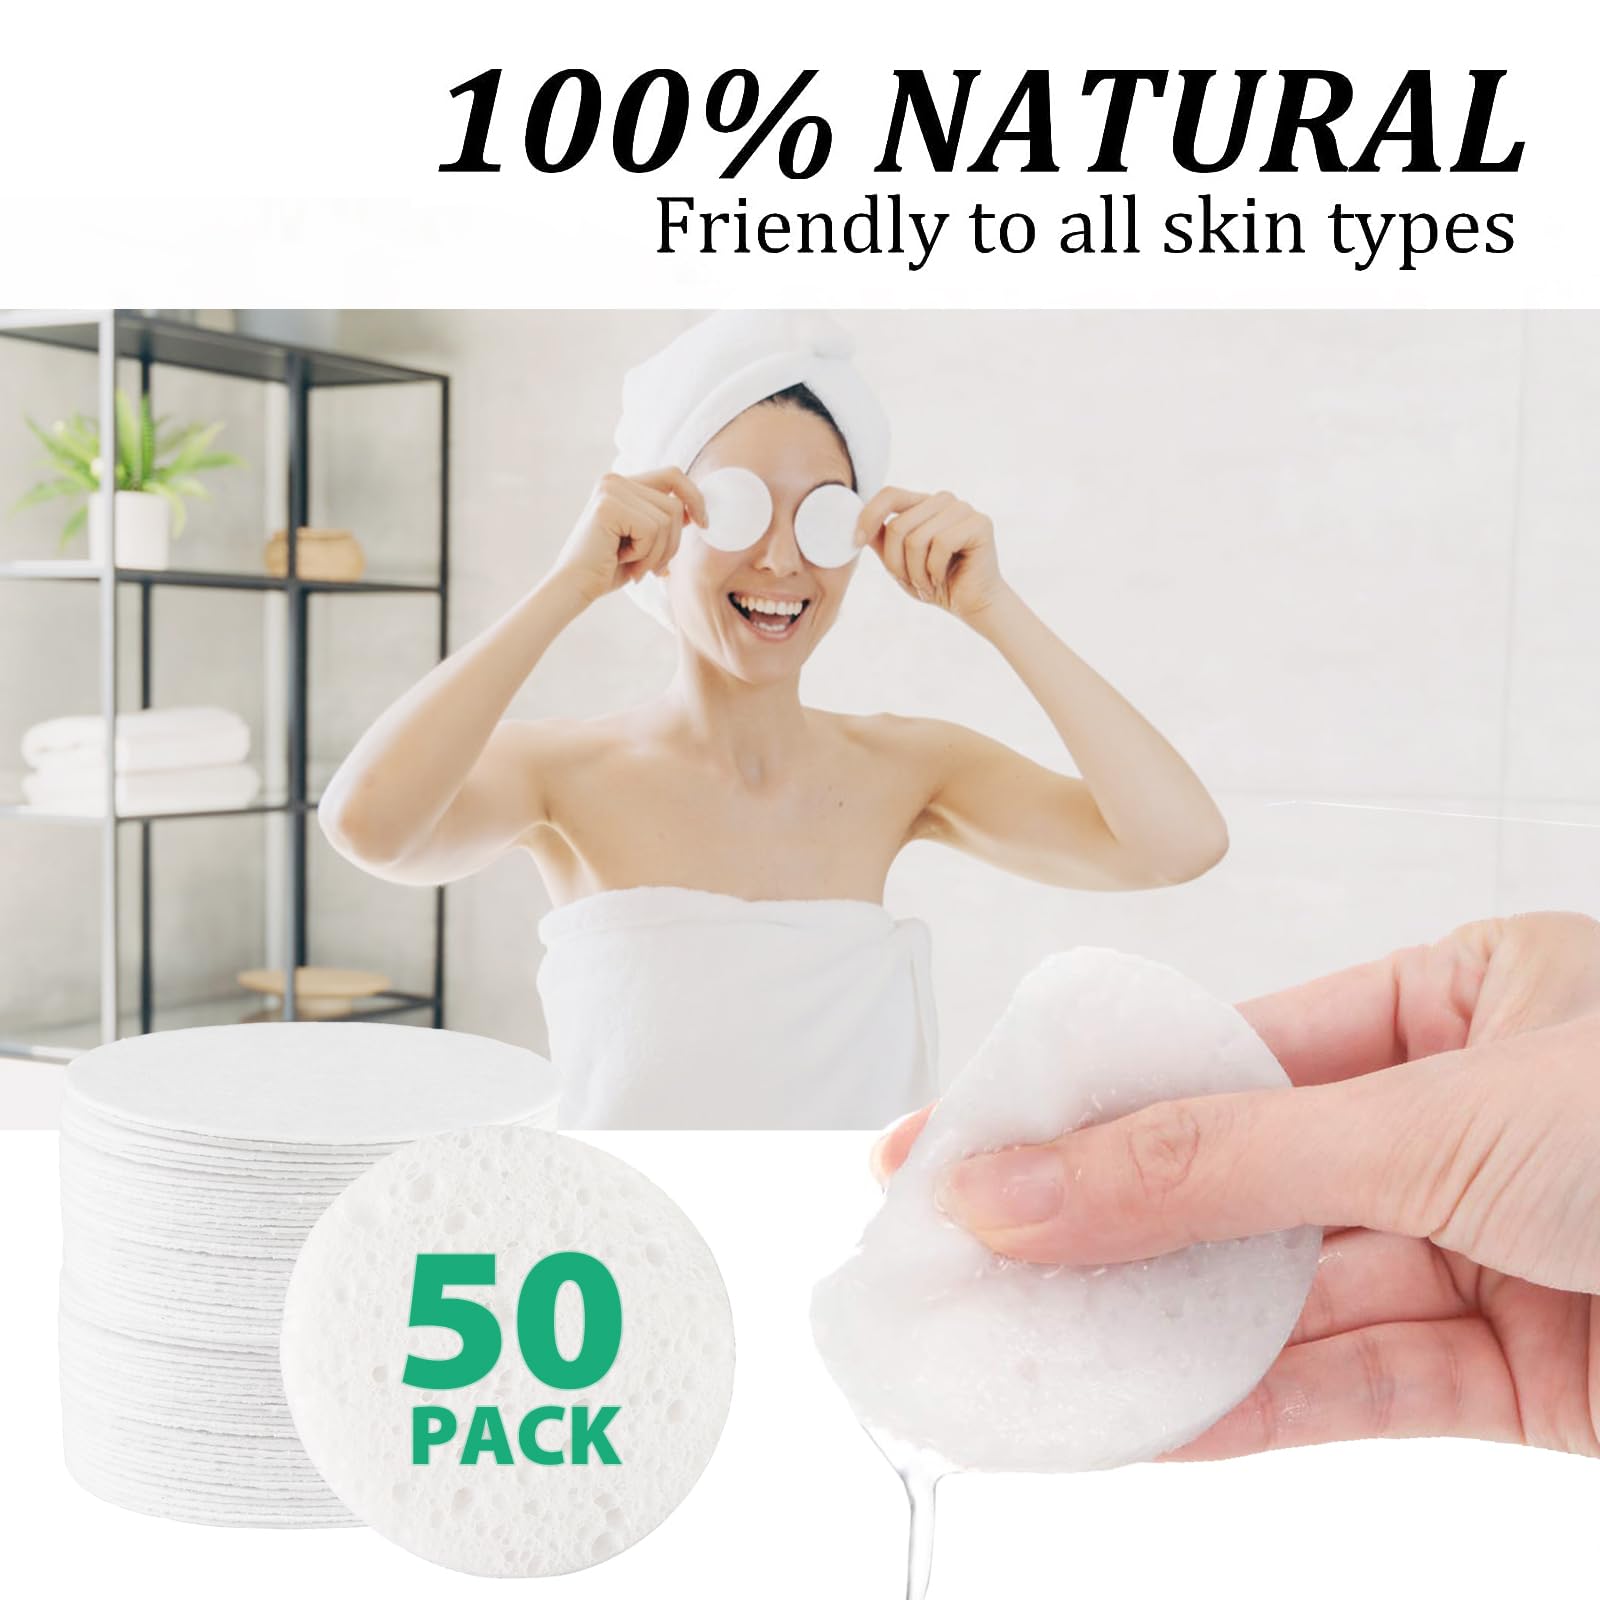 50-Count Compressed Facial Sponges, 100% Natural Cellulose Spa Sponge Perfect for for Daily Cleansing, Exfoliating, Removing Dead Skin and Makeup Removal